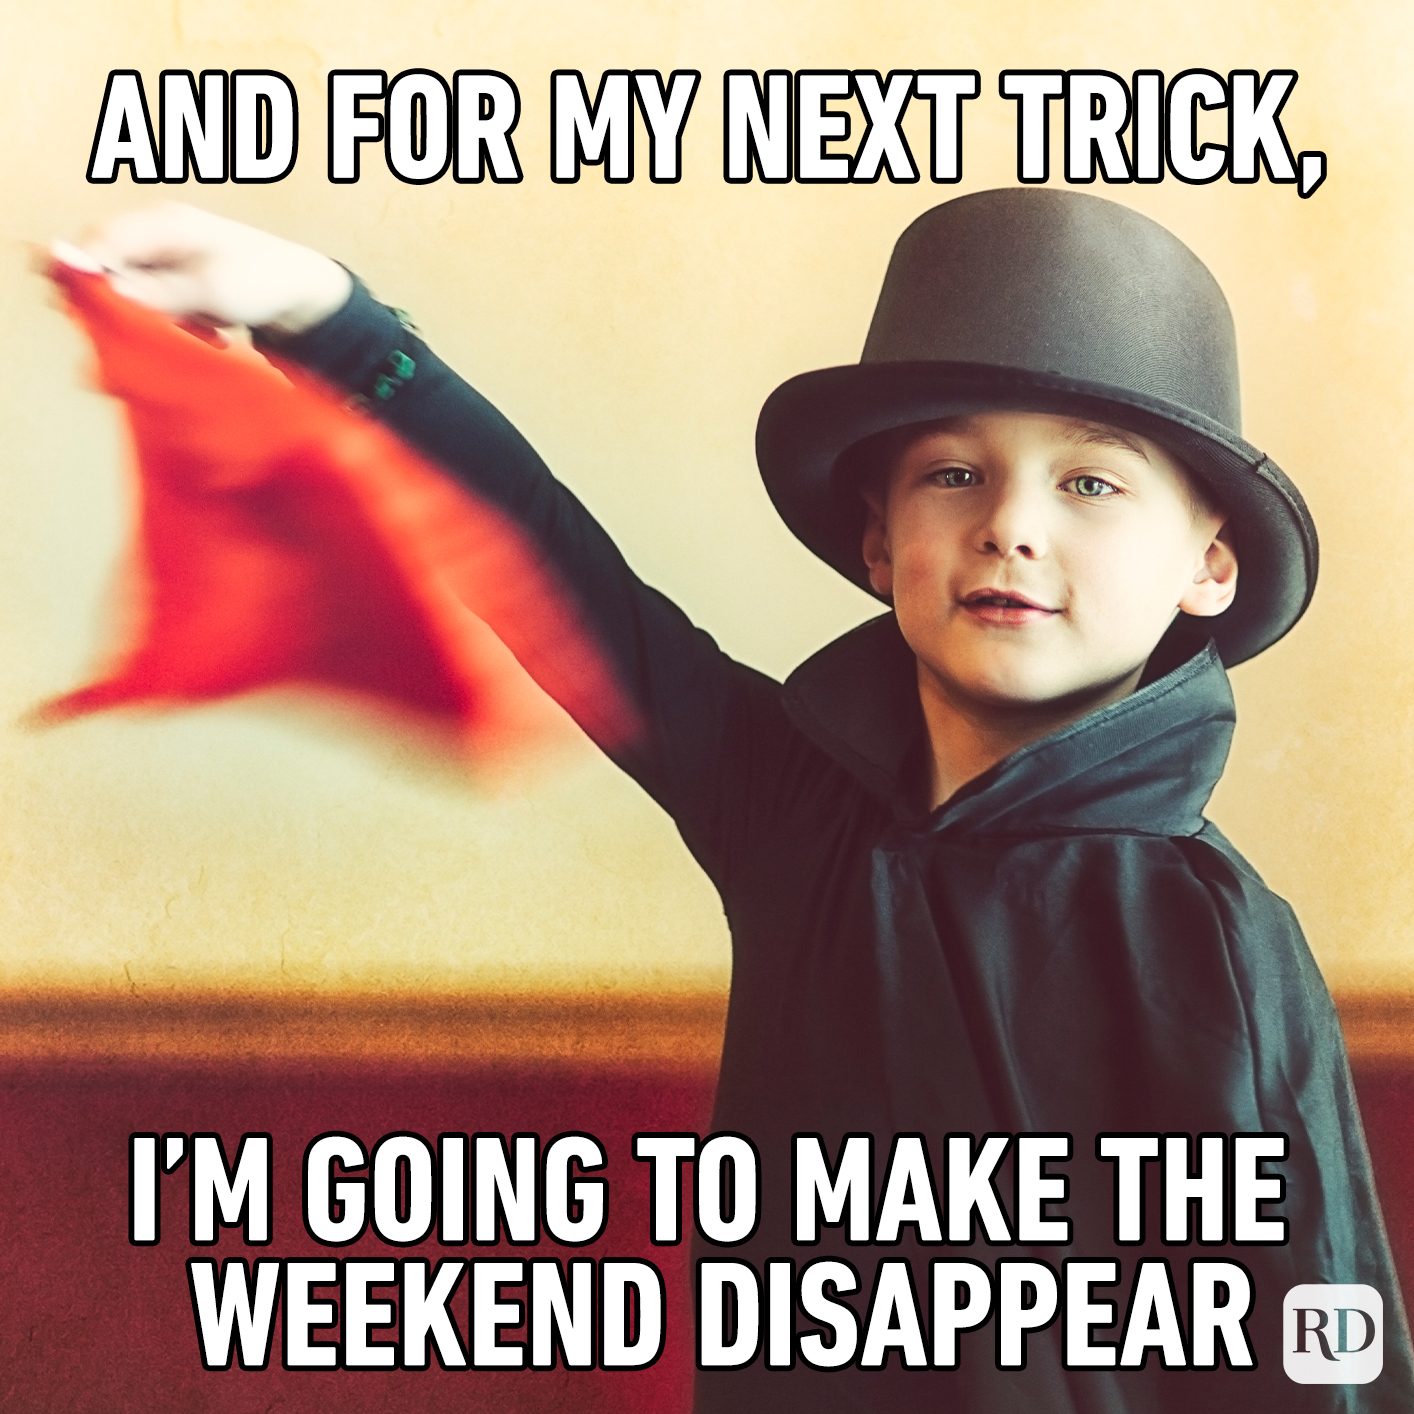 And For My Next Trick, I’m Going To Make The Weekend Disappear